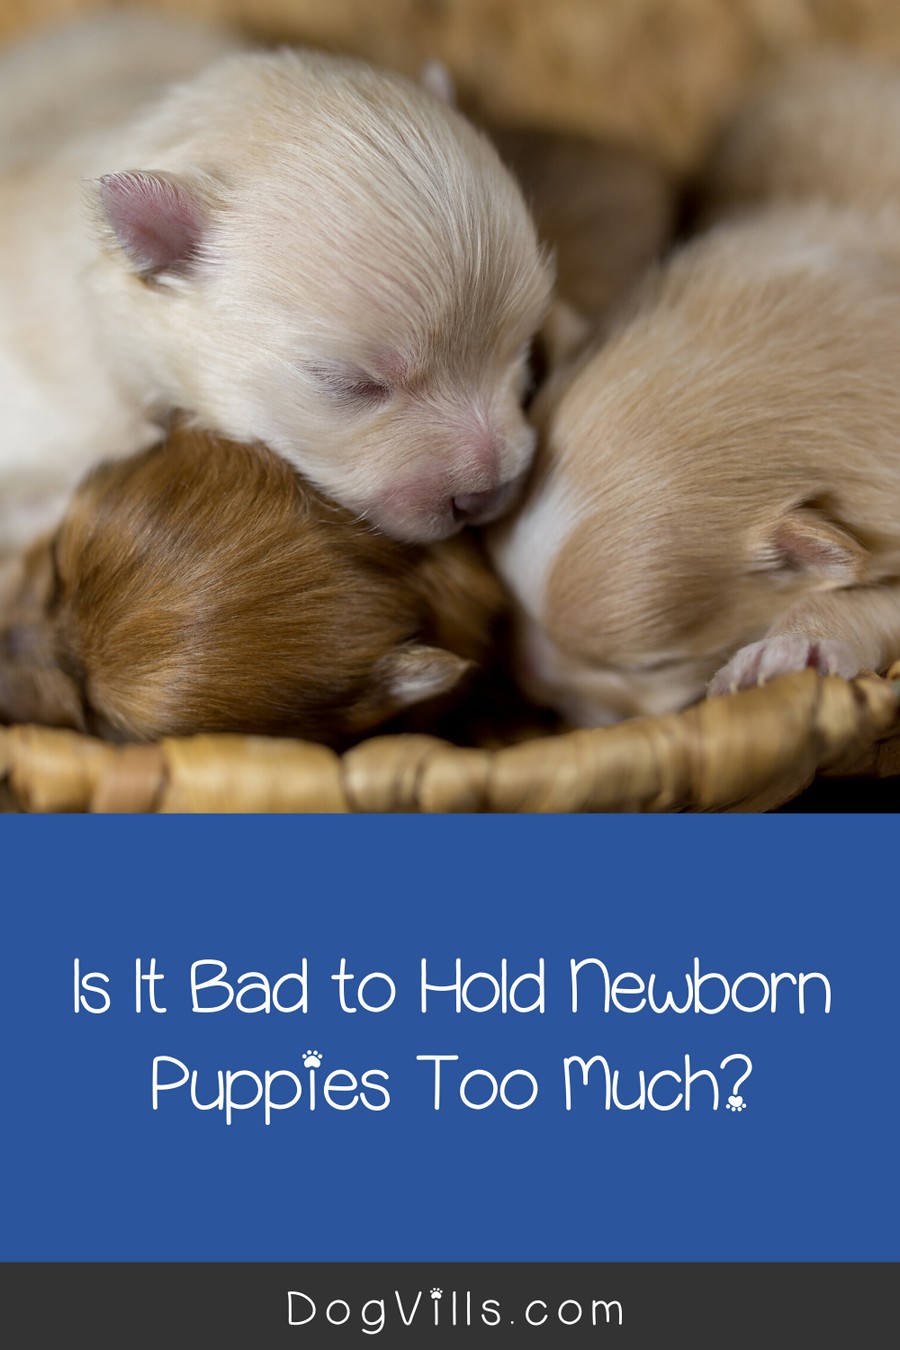 Is It Bad to Hold Newborn Puppies Too Much? - DogVills